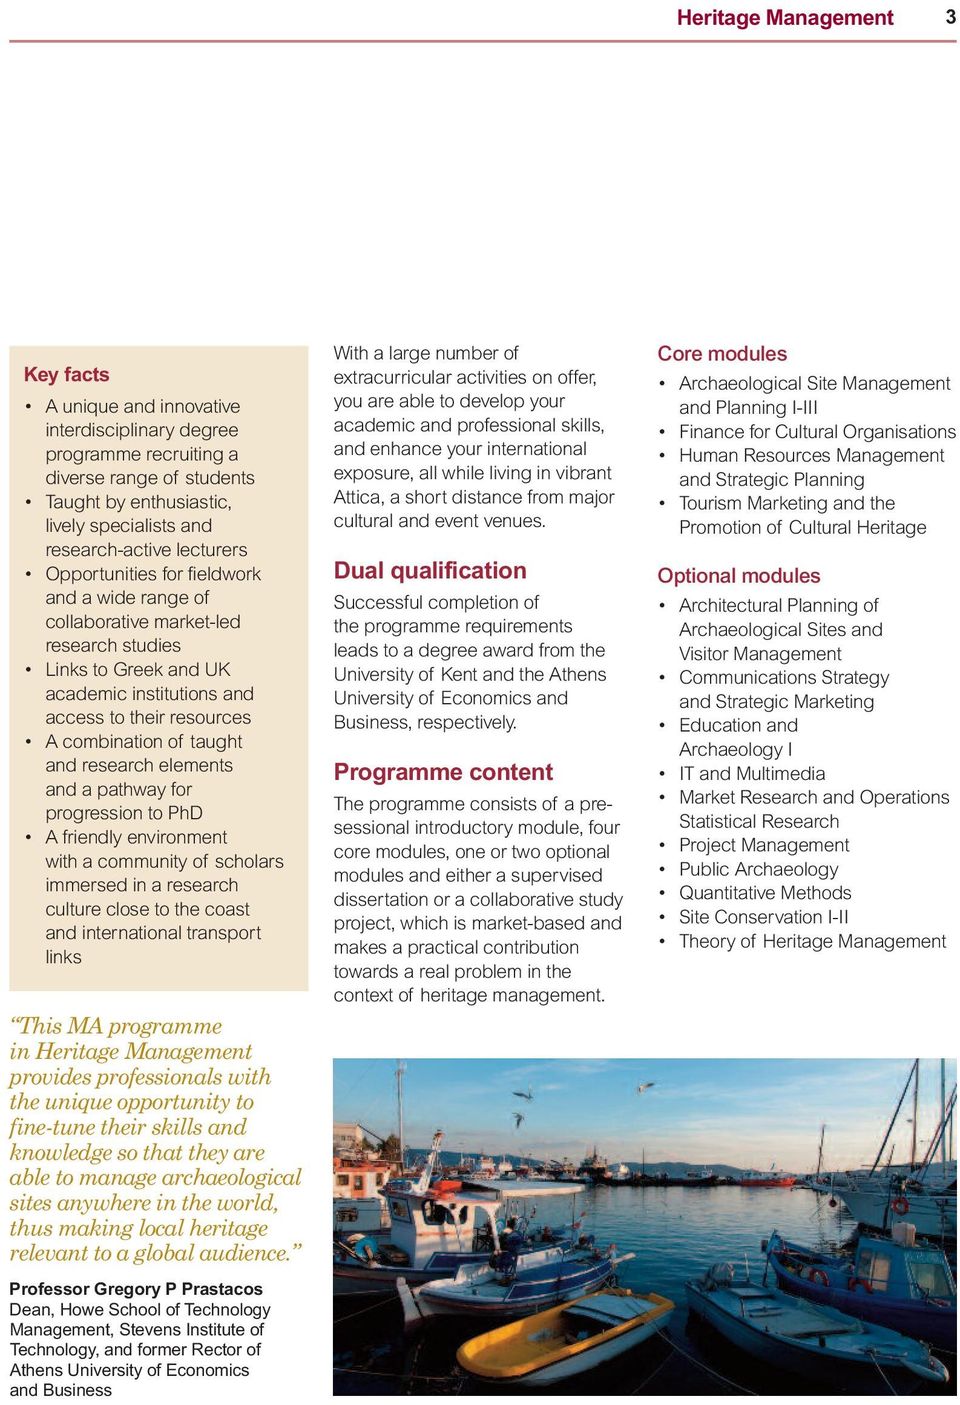 and research elements and a pathway for progression to PhD A friendly environment with a community of scholars immersed in a research culture close to the coast and international transport links This